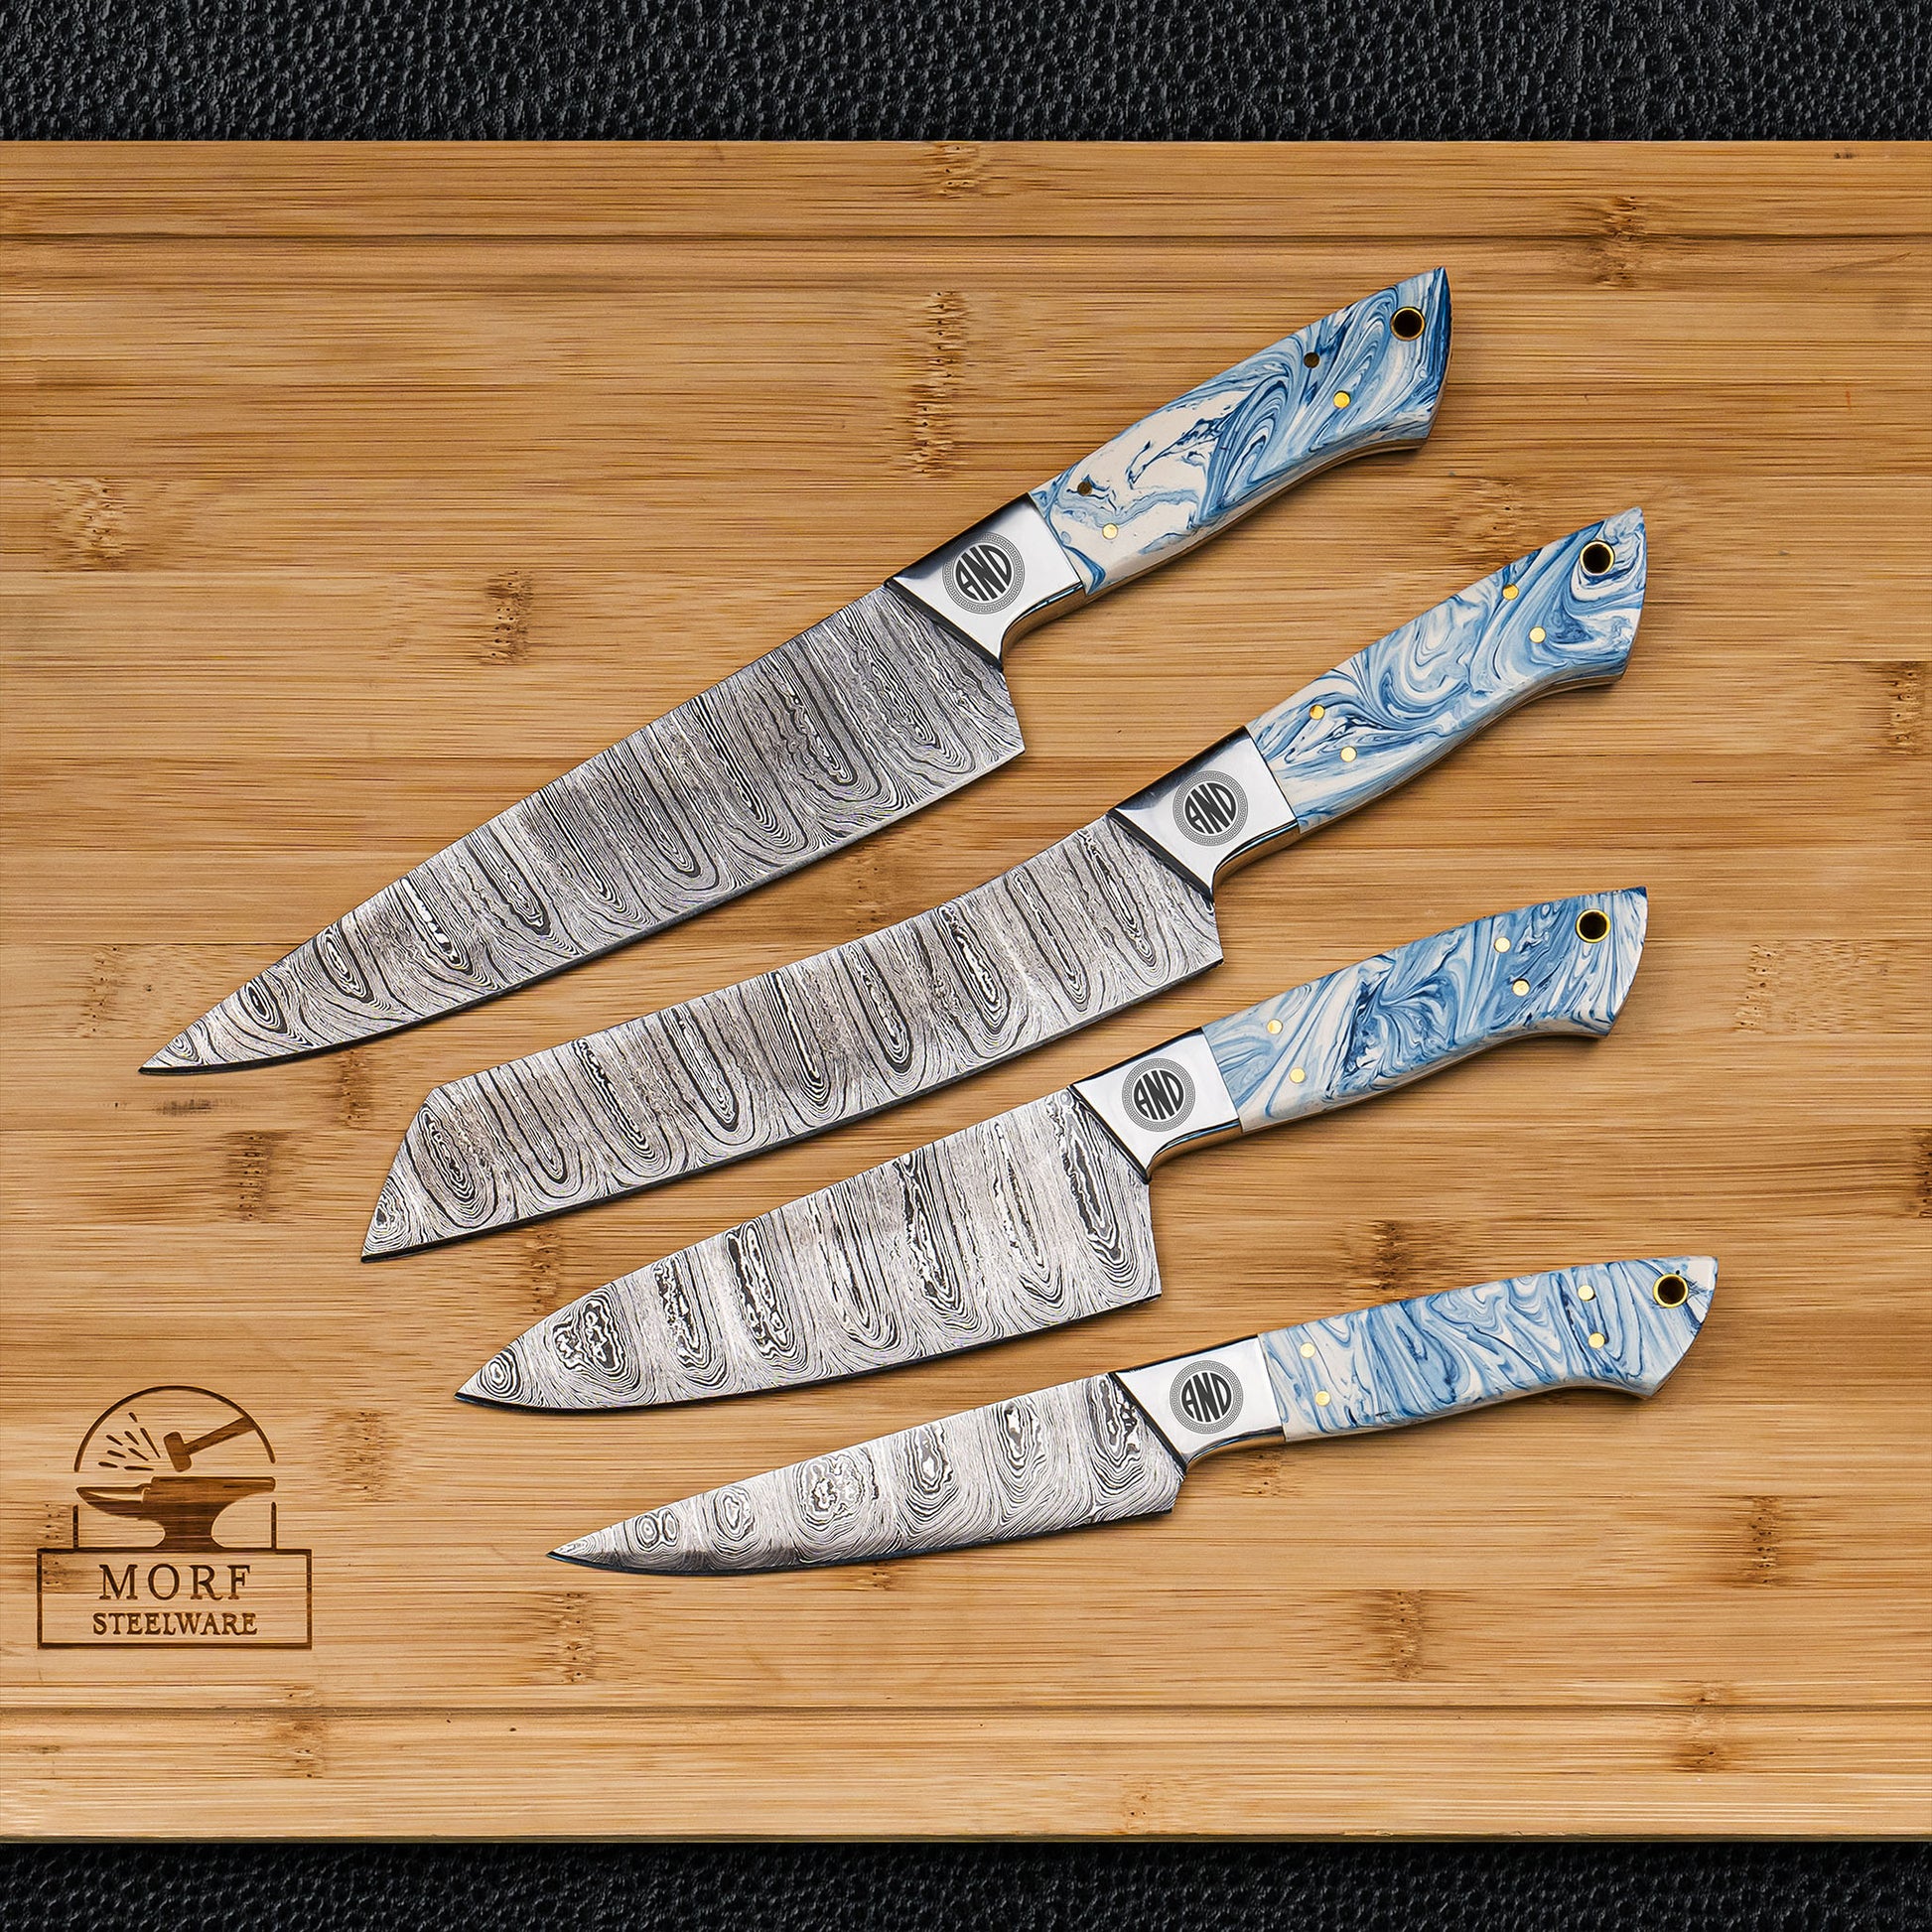 Handmade Damascus Steel Blade Kitchen Knife Set 5pcs Best Damascus Chef Knife Set Professional Kitchen Cooking Knives with Leather Case/Bag